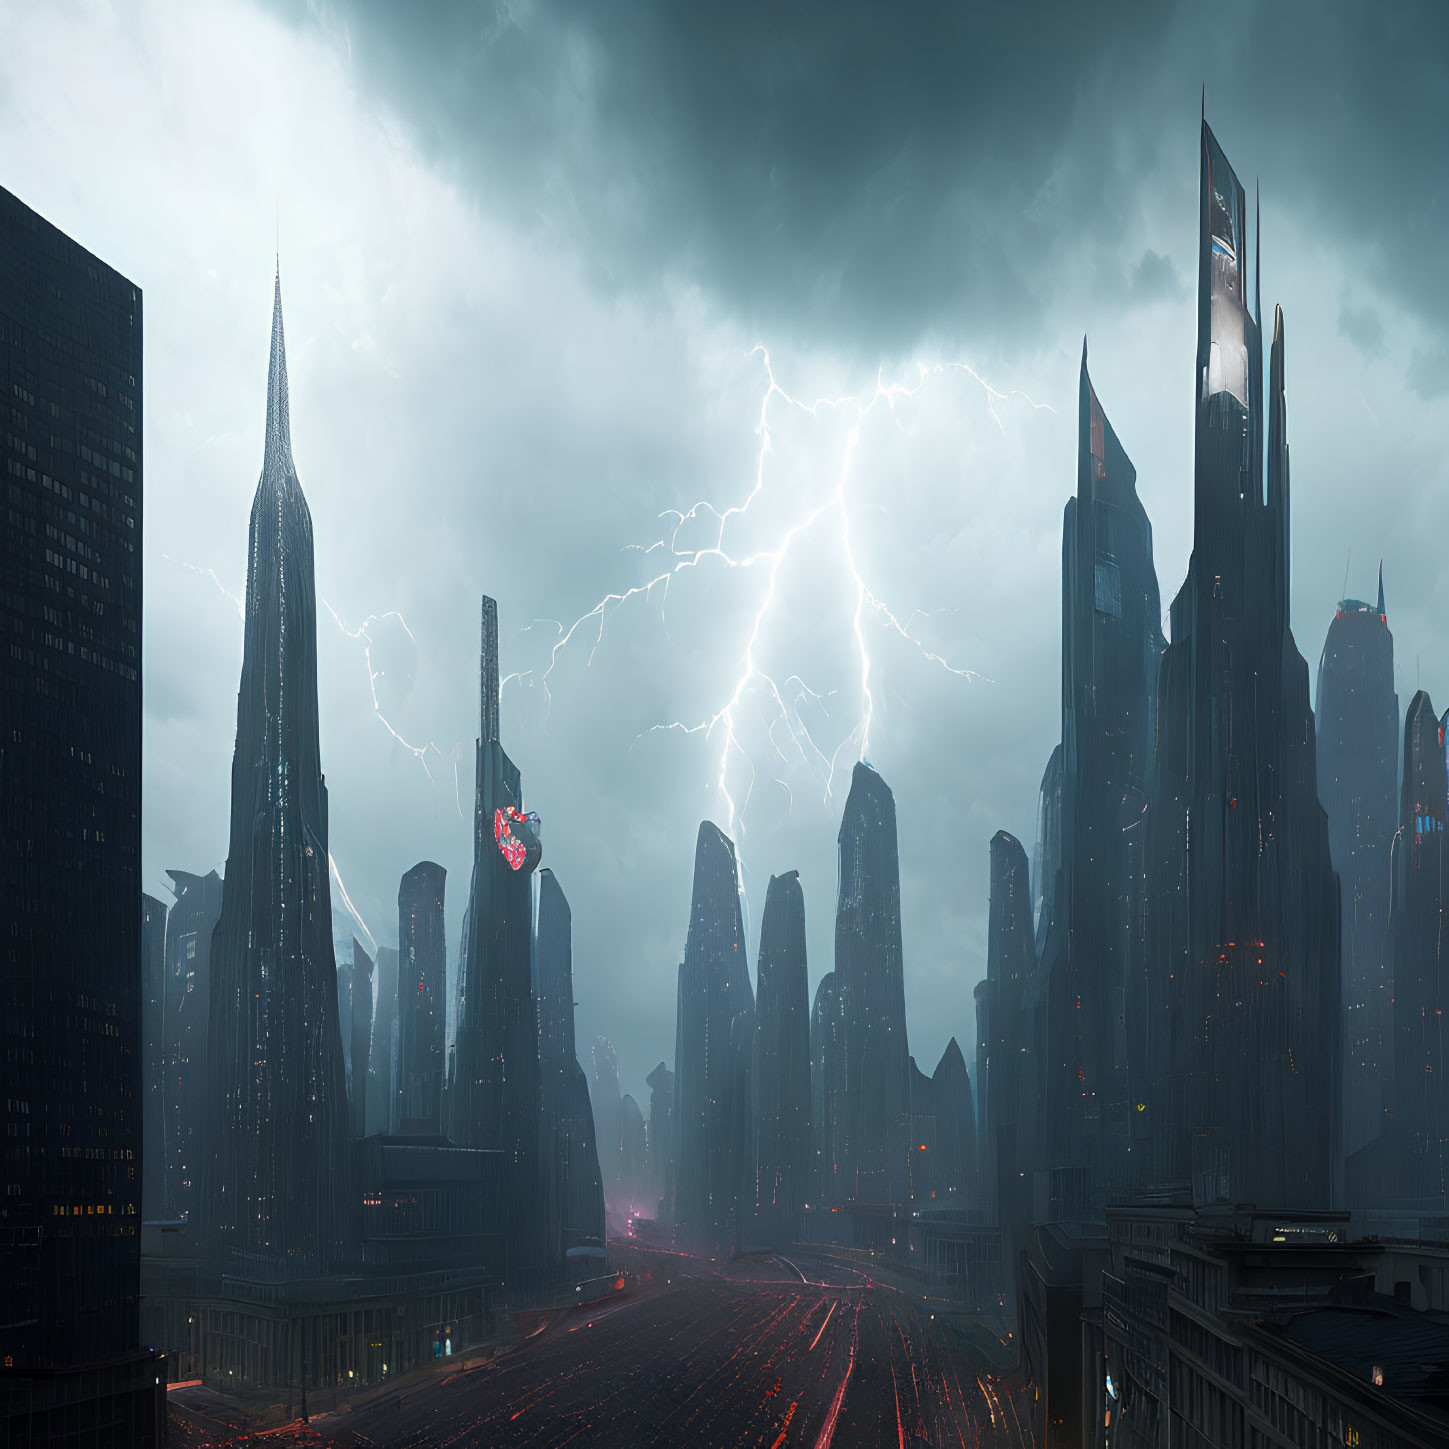 Futuristic cityscape with towering skyscrapers under stormy sky